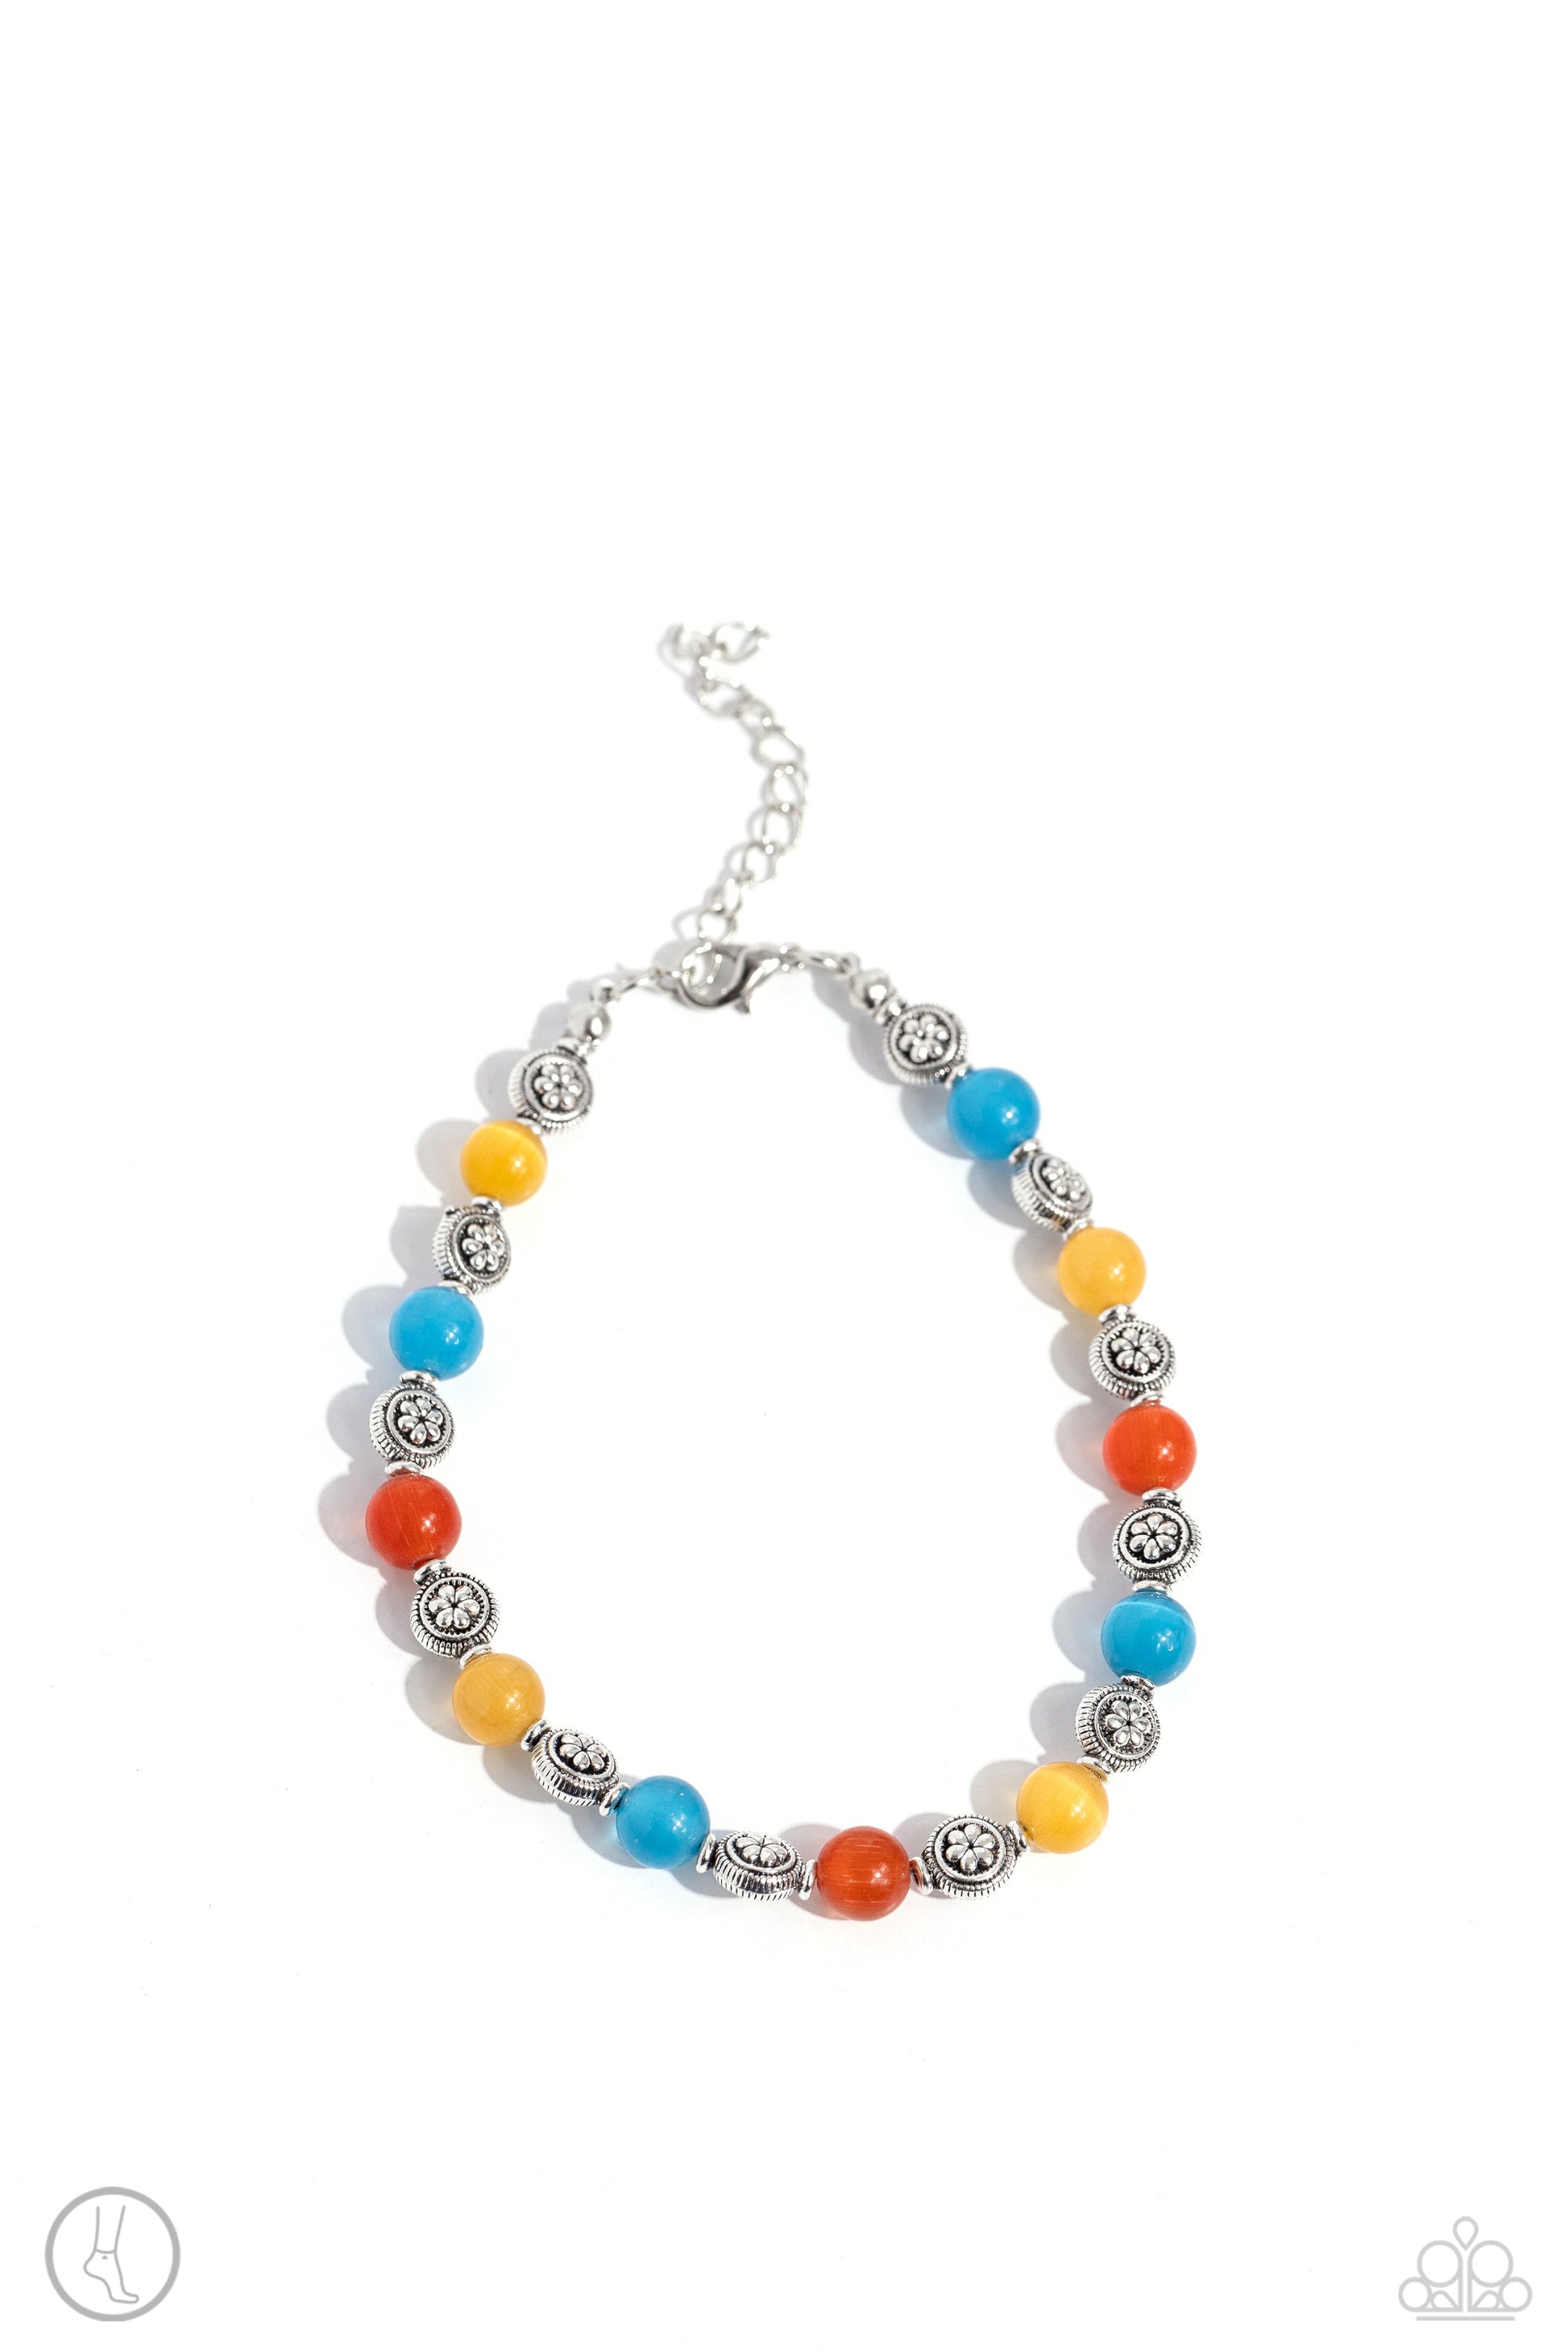 Beachy Bouquet - Multi Color Anklet - Paparazzi Accessories - Infused along an invisible wire, a glowing collection of blue, orange, and yellow cat's eye stones alternate with floral motif textured silver beads for a beachy statement around the ankle. Features an adjustable clasp closure. Sold as one individual anklet.